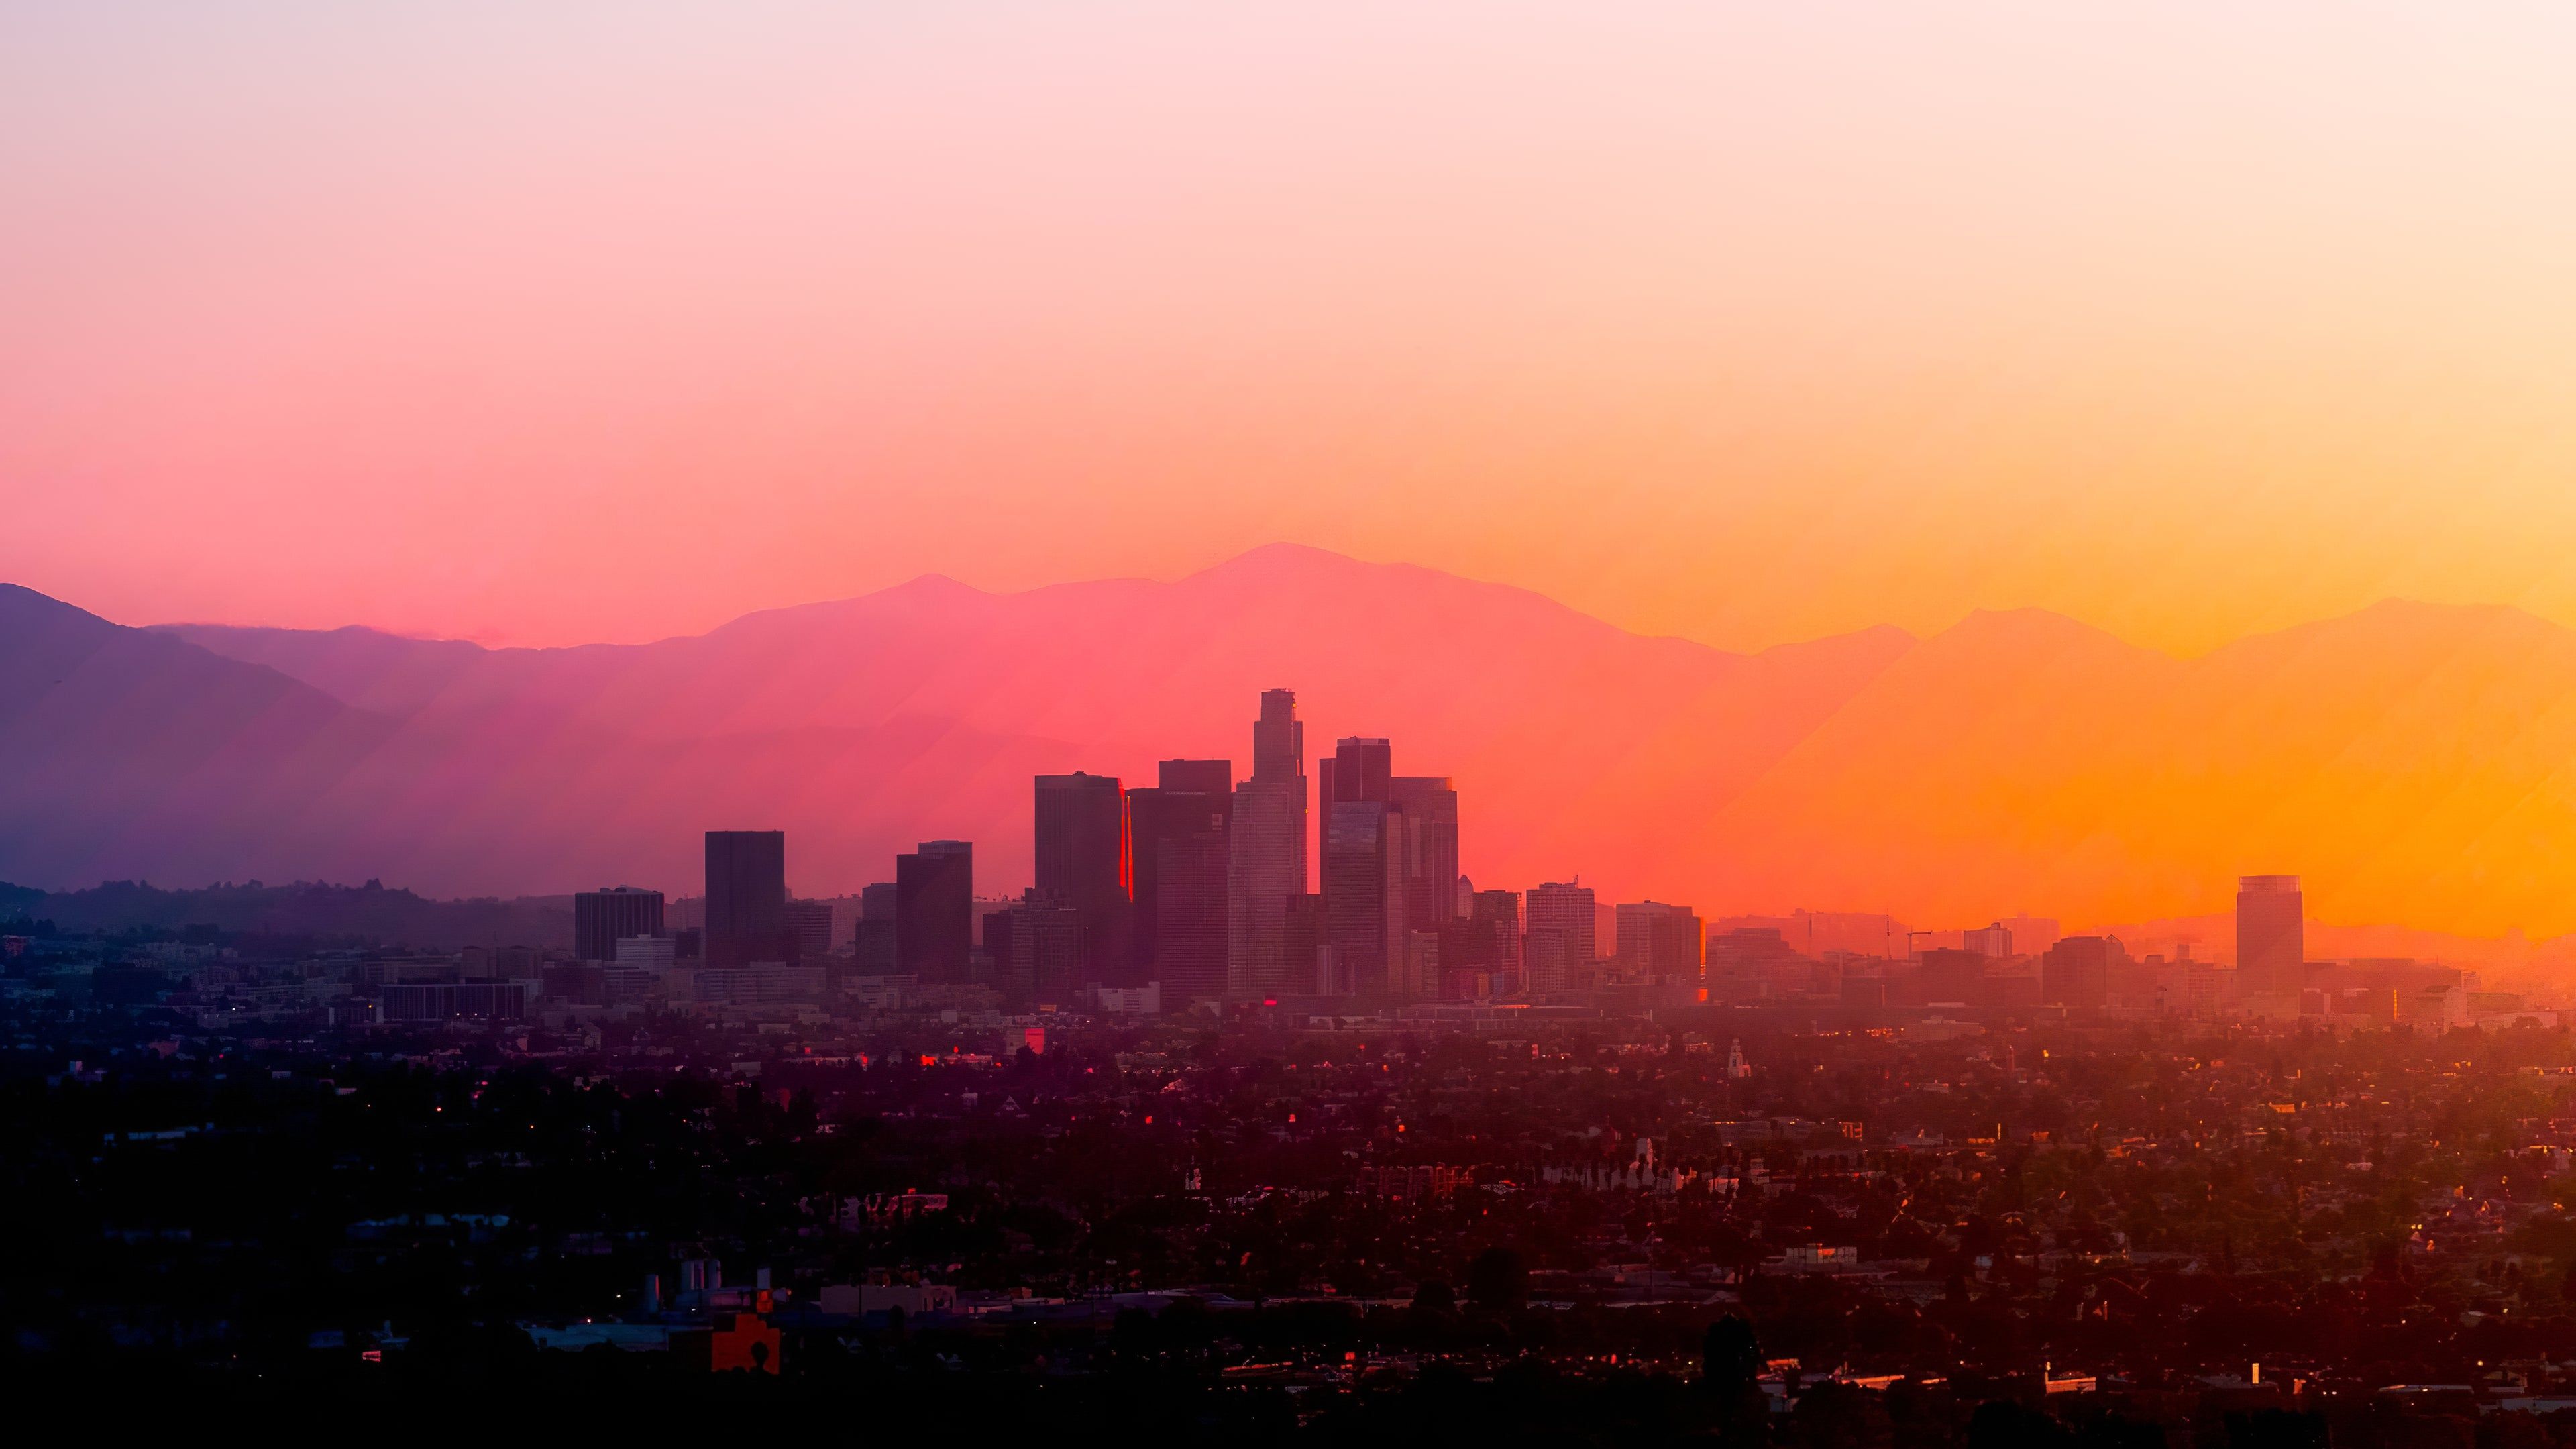 A city skyline at sunset with mountains in the background - Los Angeles